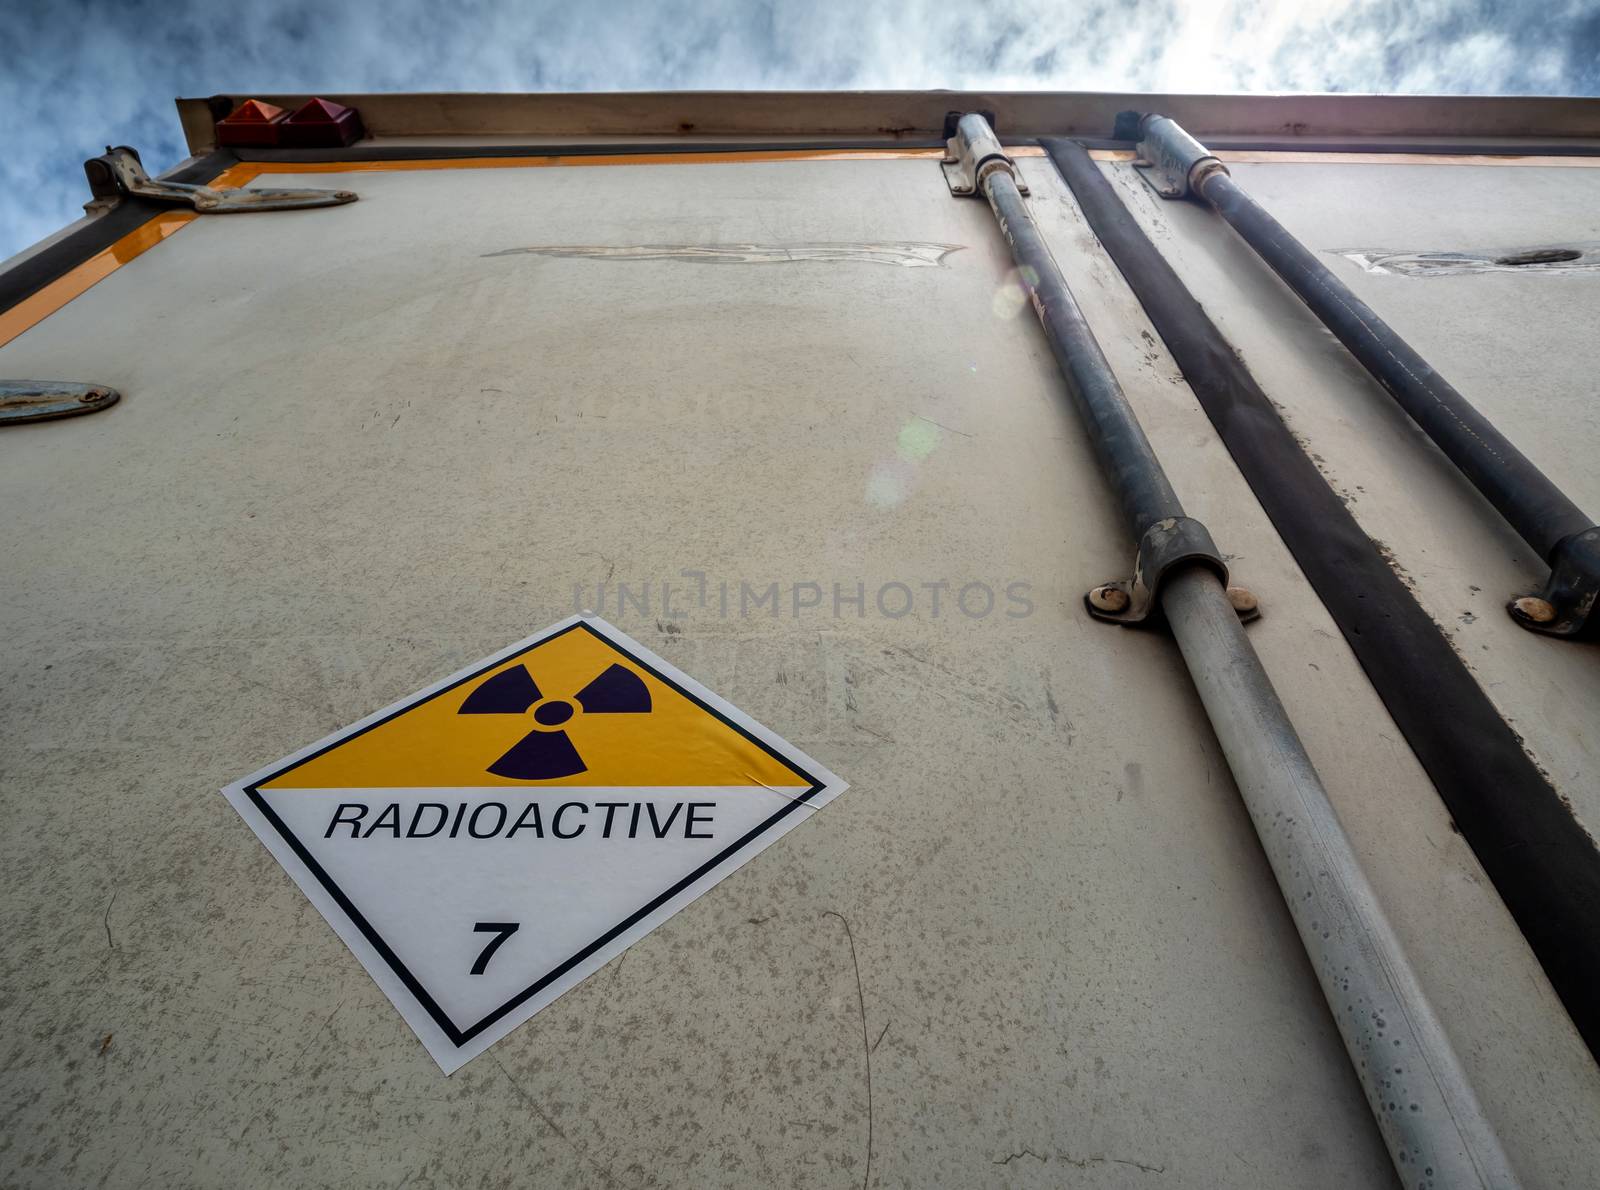 Radiation warning sign on the transport label Class 7 at the Doo by Satakorn